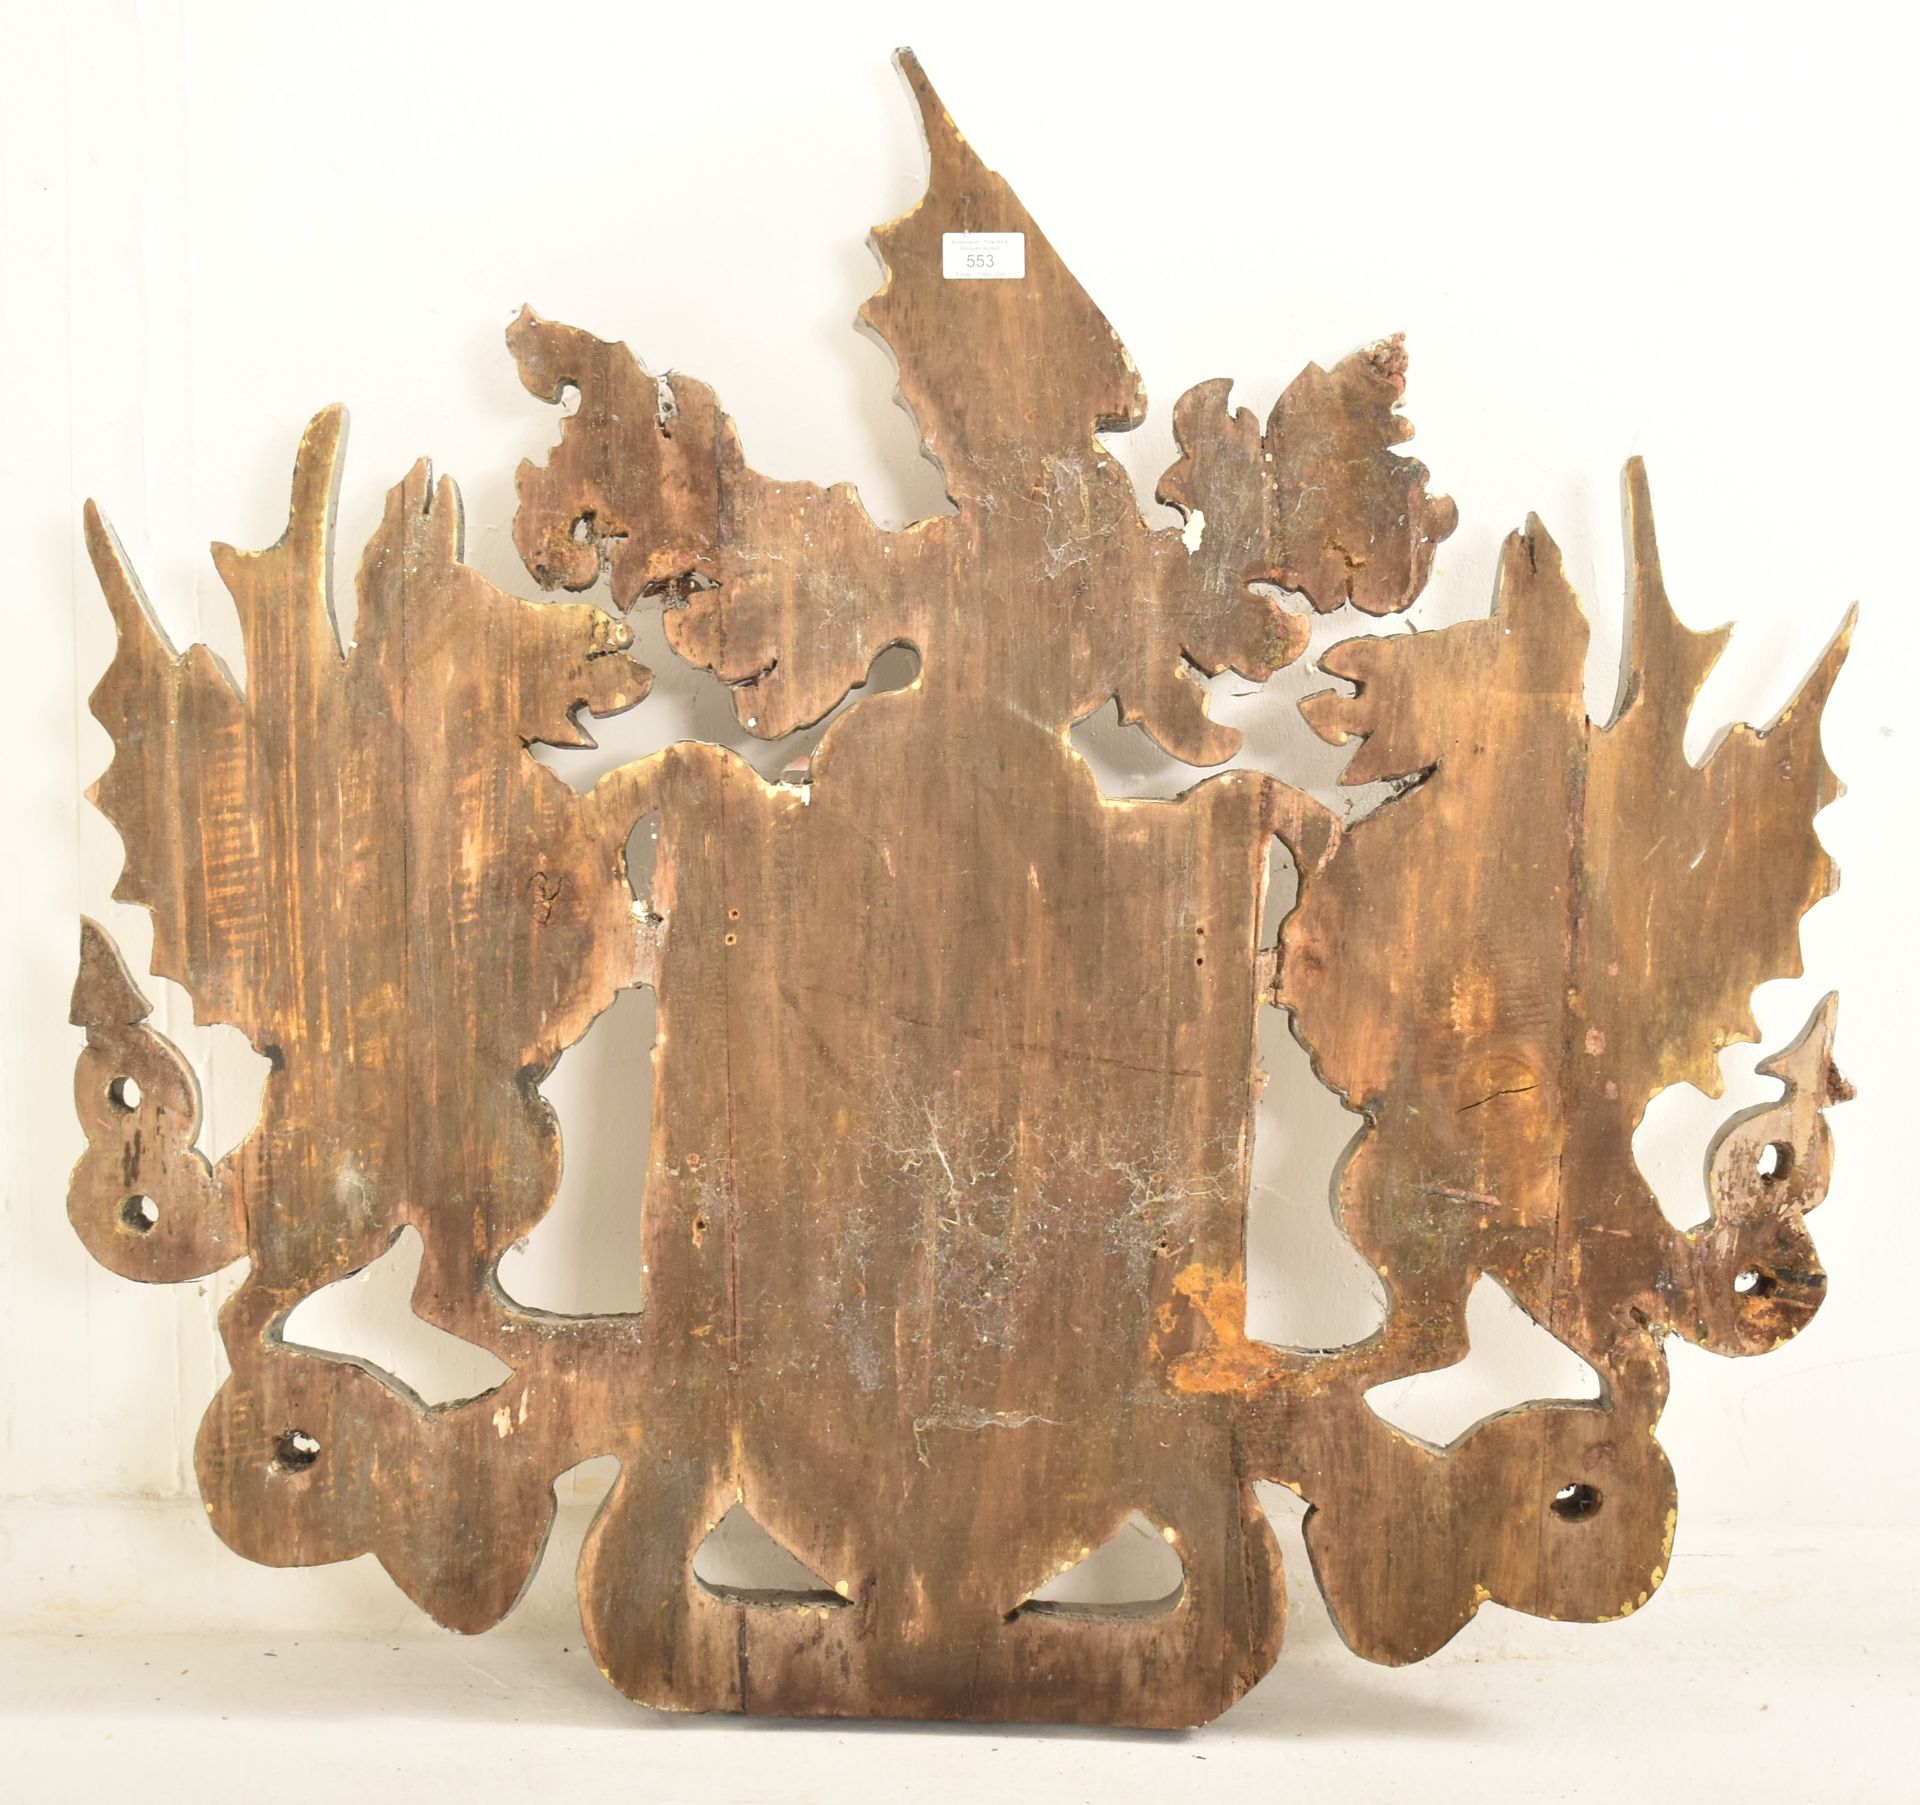 EARLY 20TH CENTURY C. 1900 CITY OF LONDON WOODEN CREST - Image 5 of 5